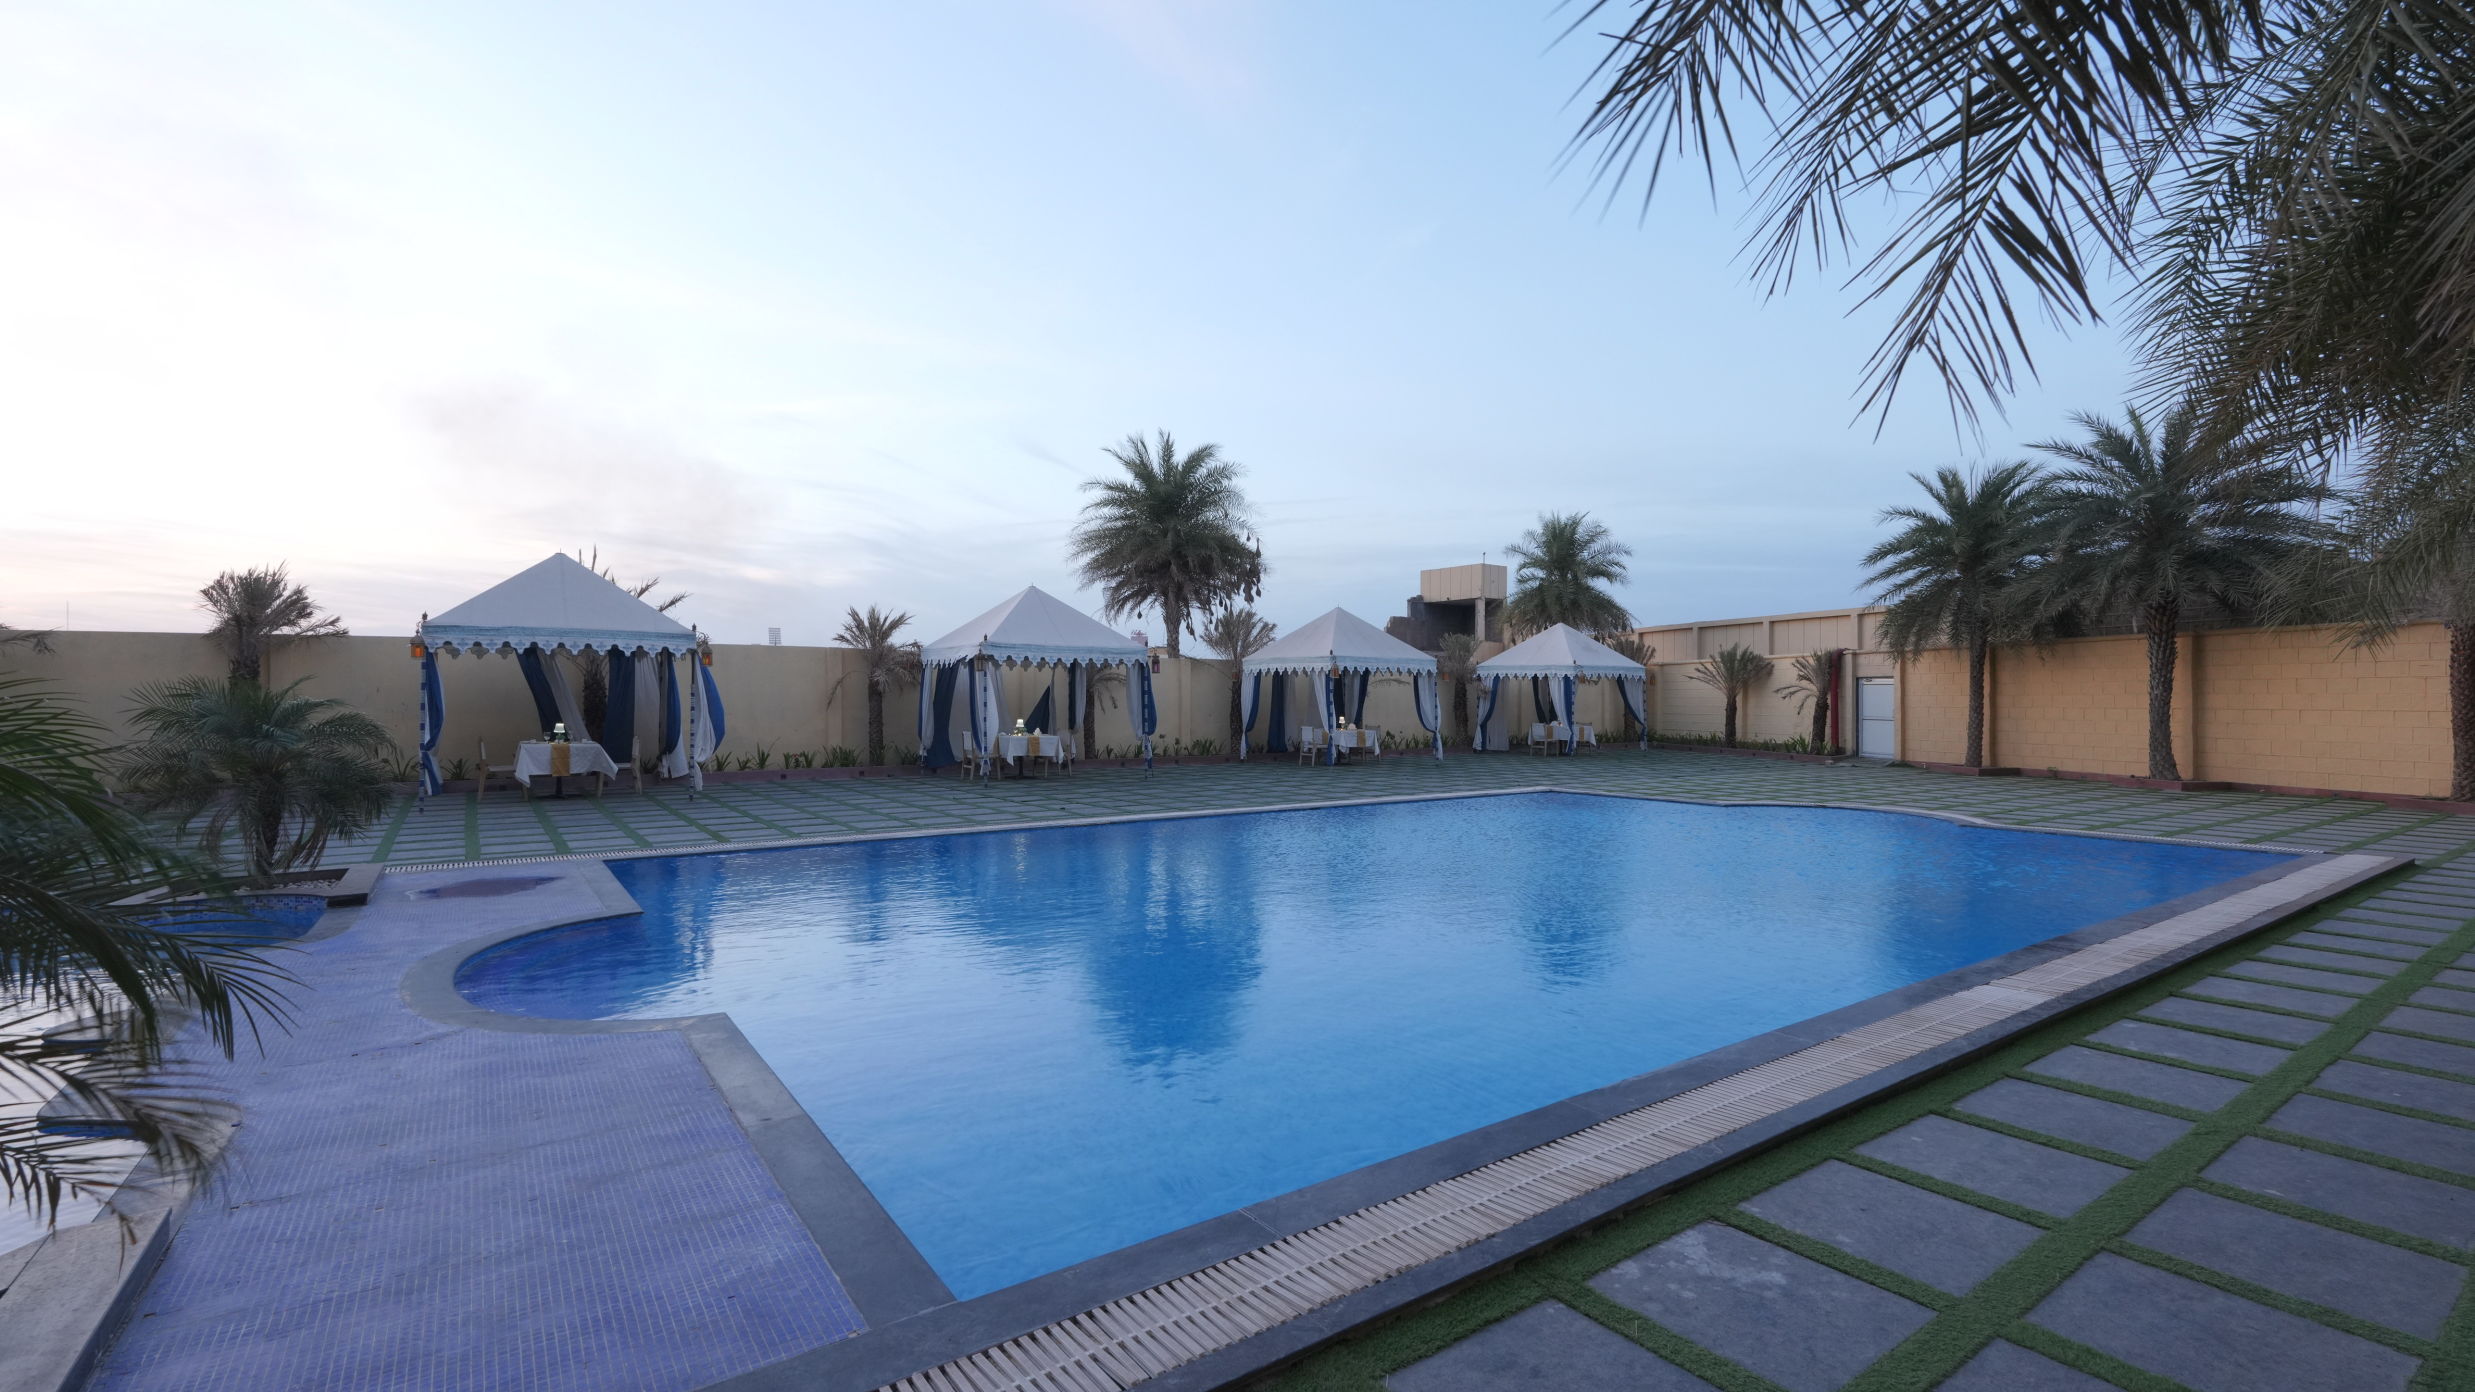 Side view of the The Palm Pool and tent seating at The Garden Ananta Elite Rajkot 2